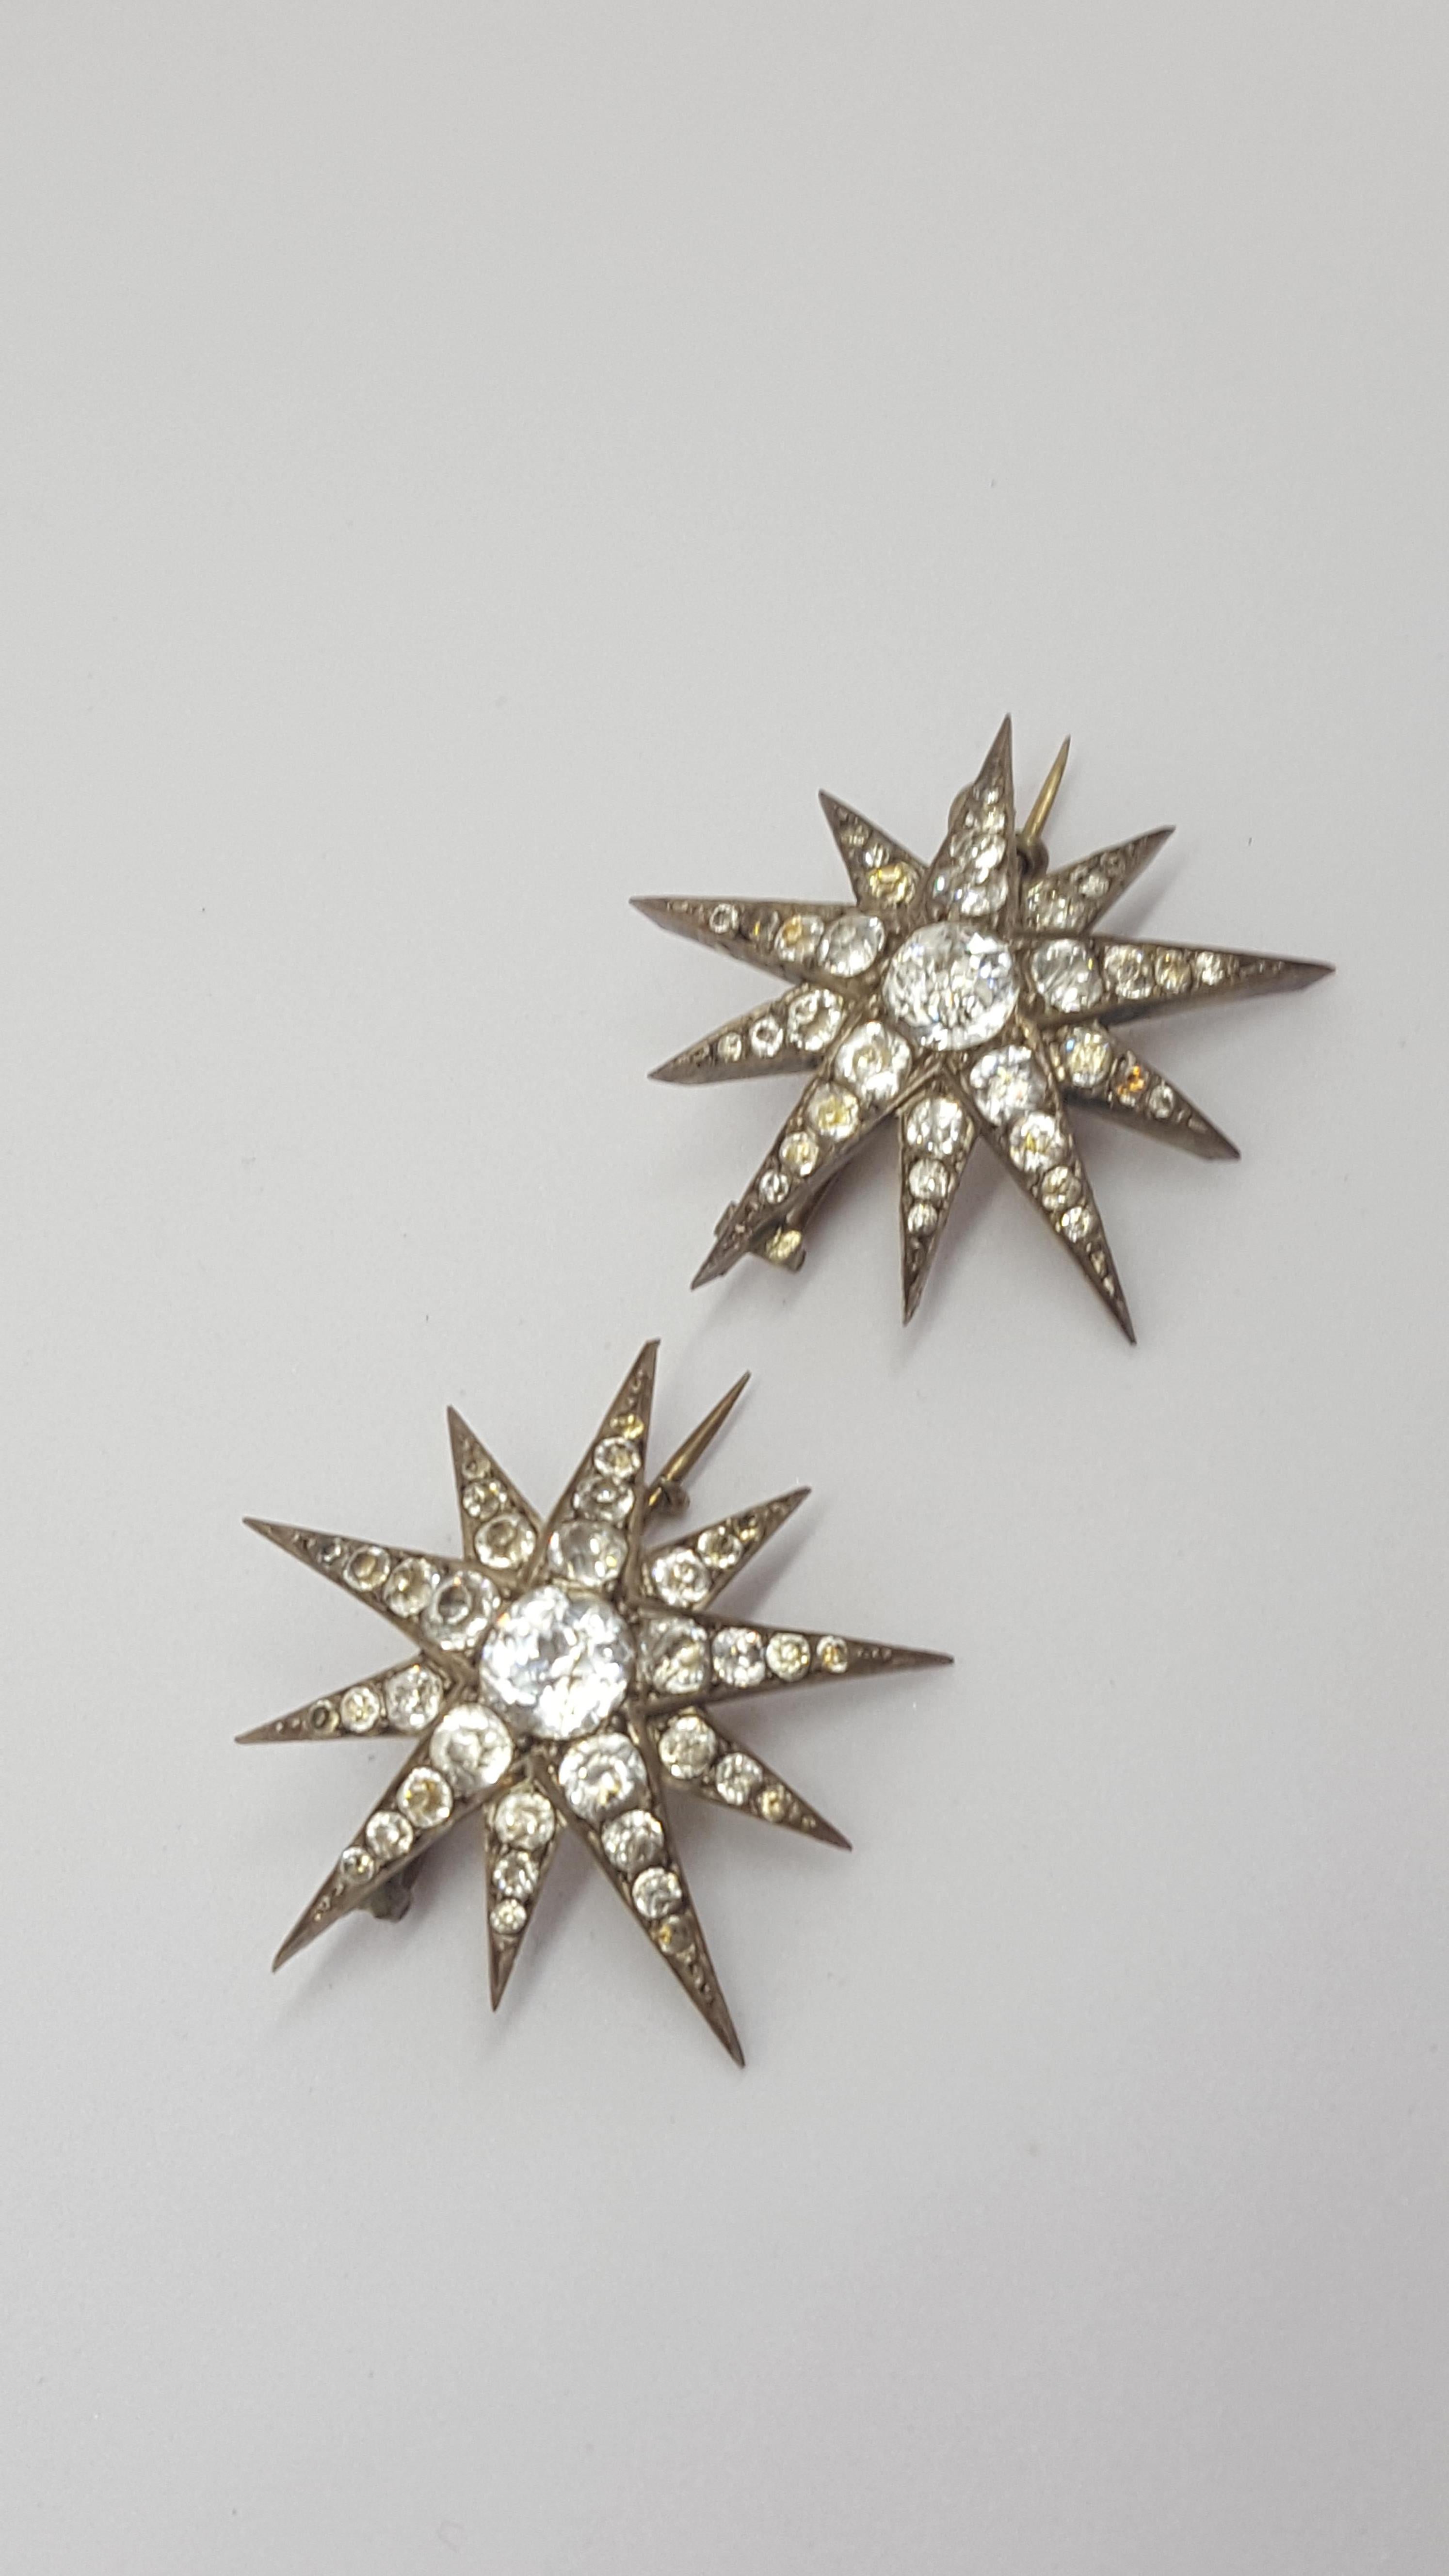 A pair of Gorgeous Antique c.1900 French origin Silver and cushion cut Paste Star brooches. The brooches also can be worn as a hair ornament.
Width 35mm each. 
One brooch marked on c-catch with French mark for Silver. 
Both brooches complete with